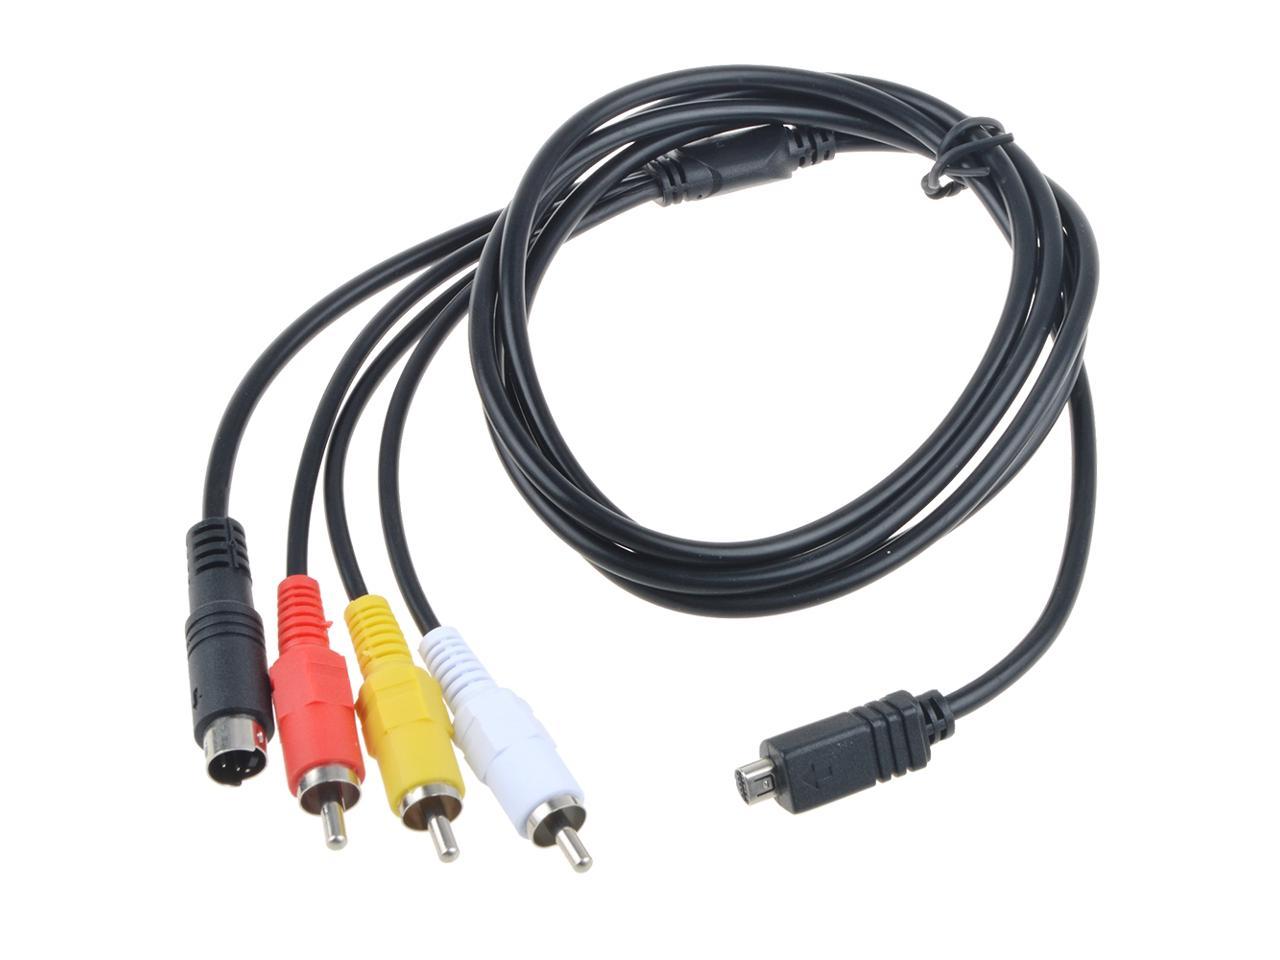 Durpower 3FT Firewire iLink 4-4 Pin DV Video Cable Cord Lead For Sony Camcorder DCR-TRV310/e 